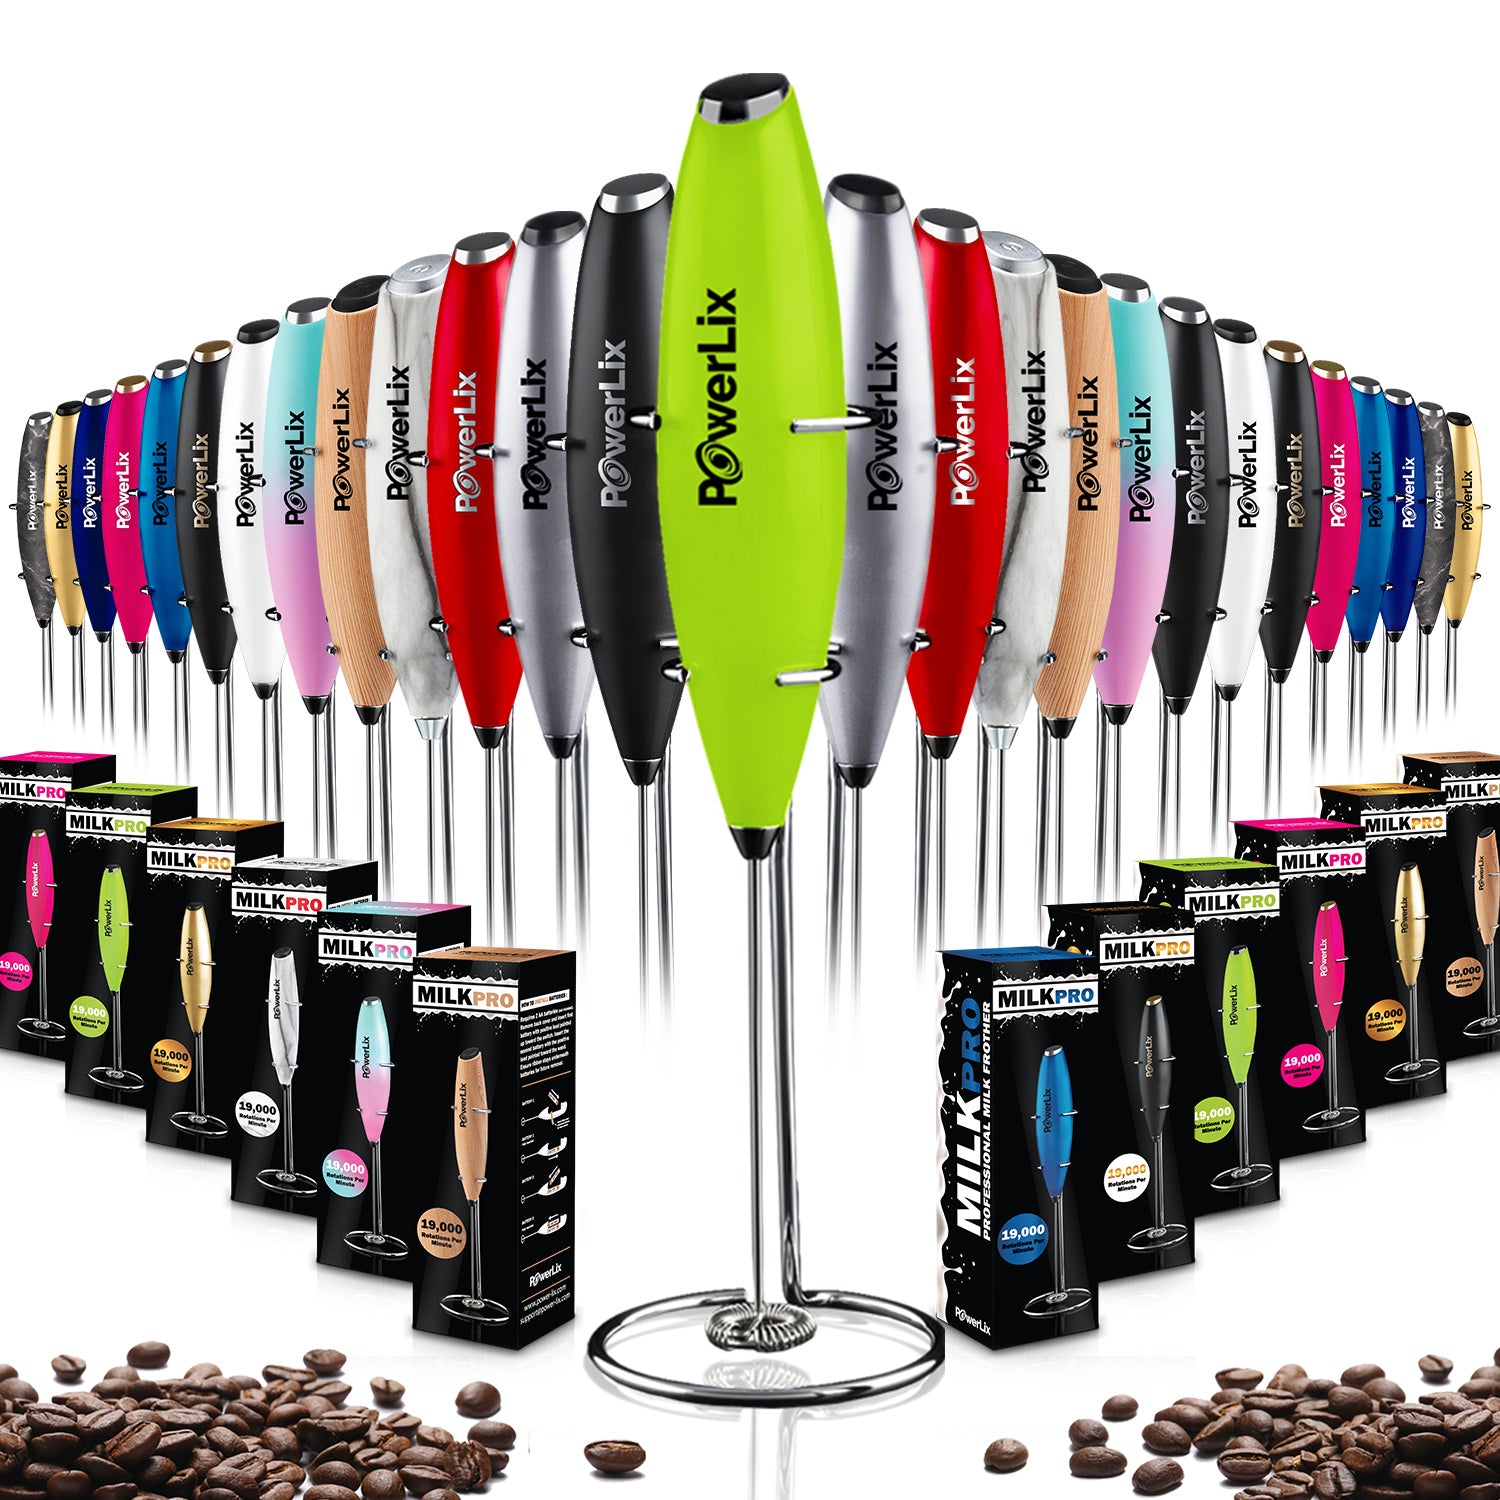 Powerlix milk frother in lime green with black text. Other colors and their boxes are displayed.